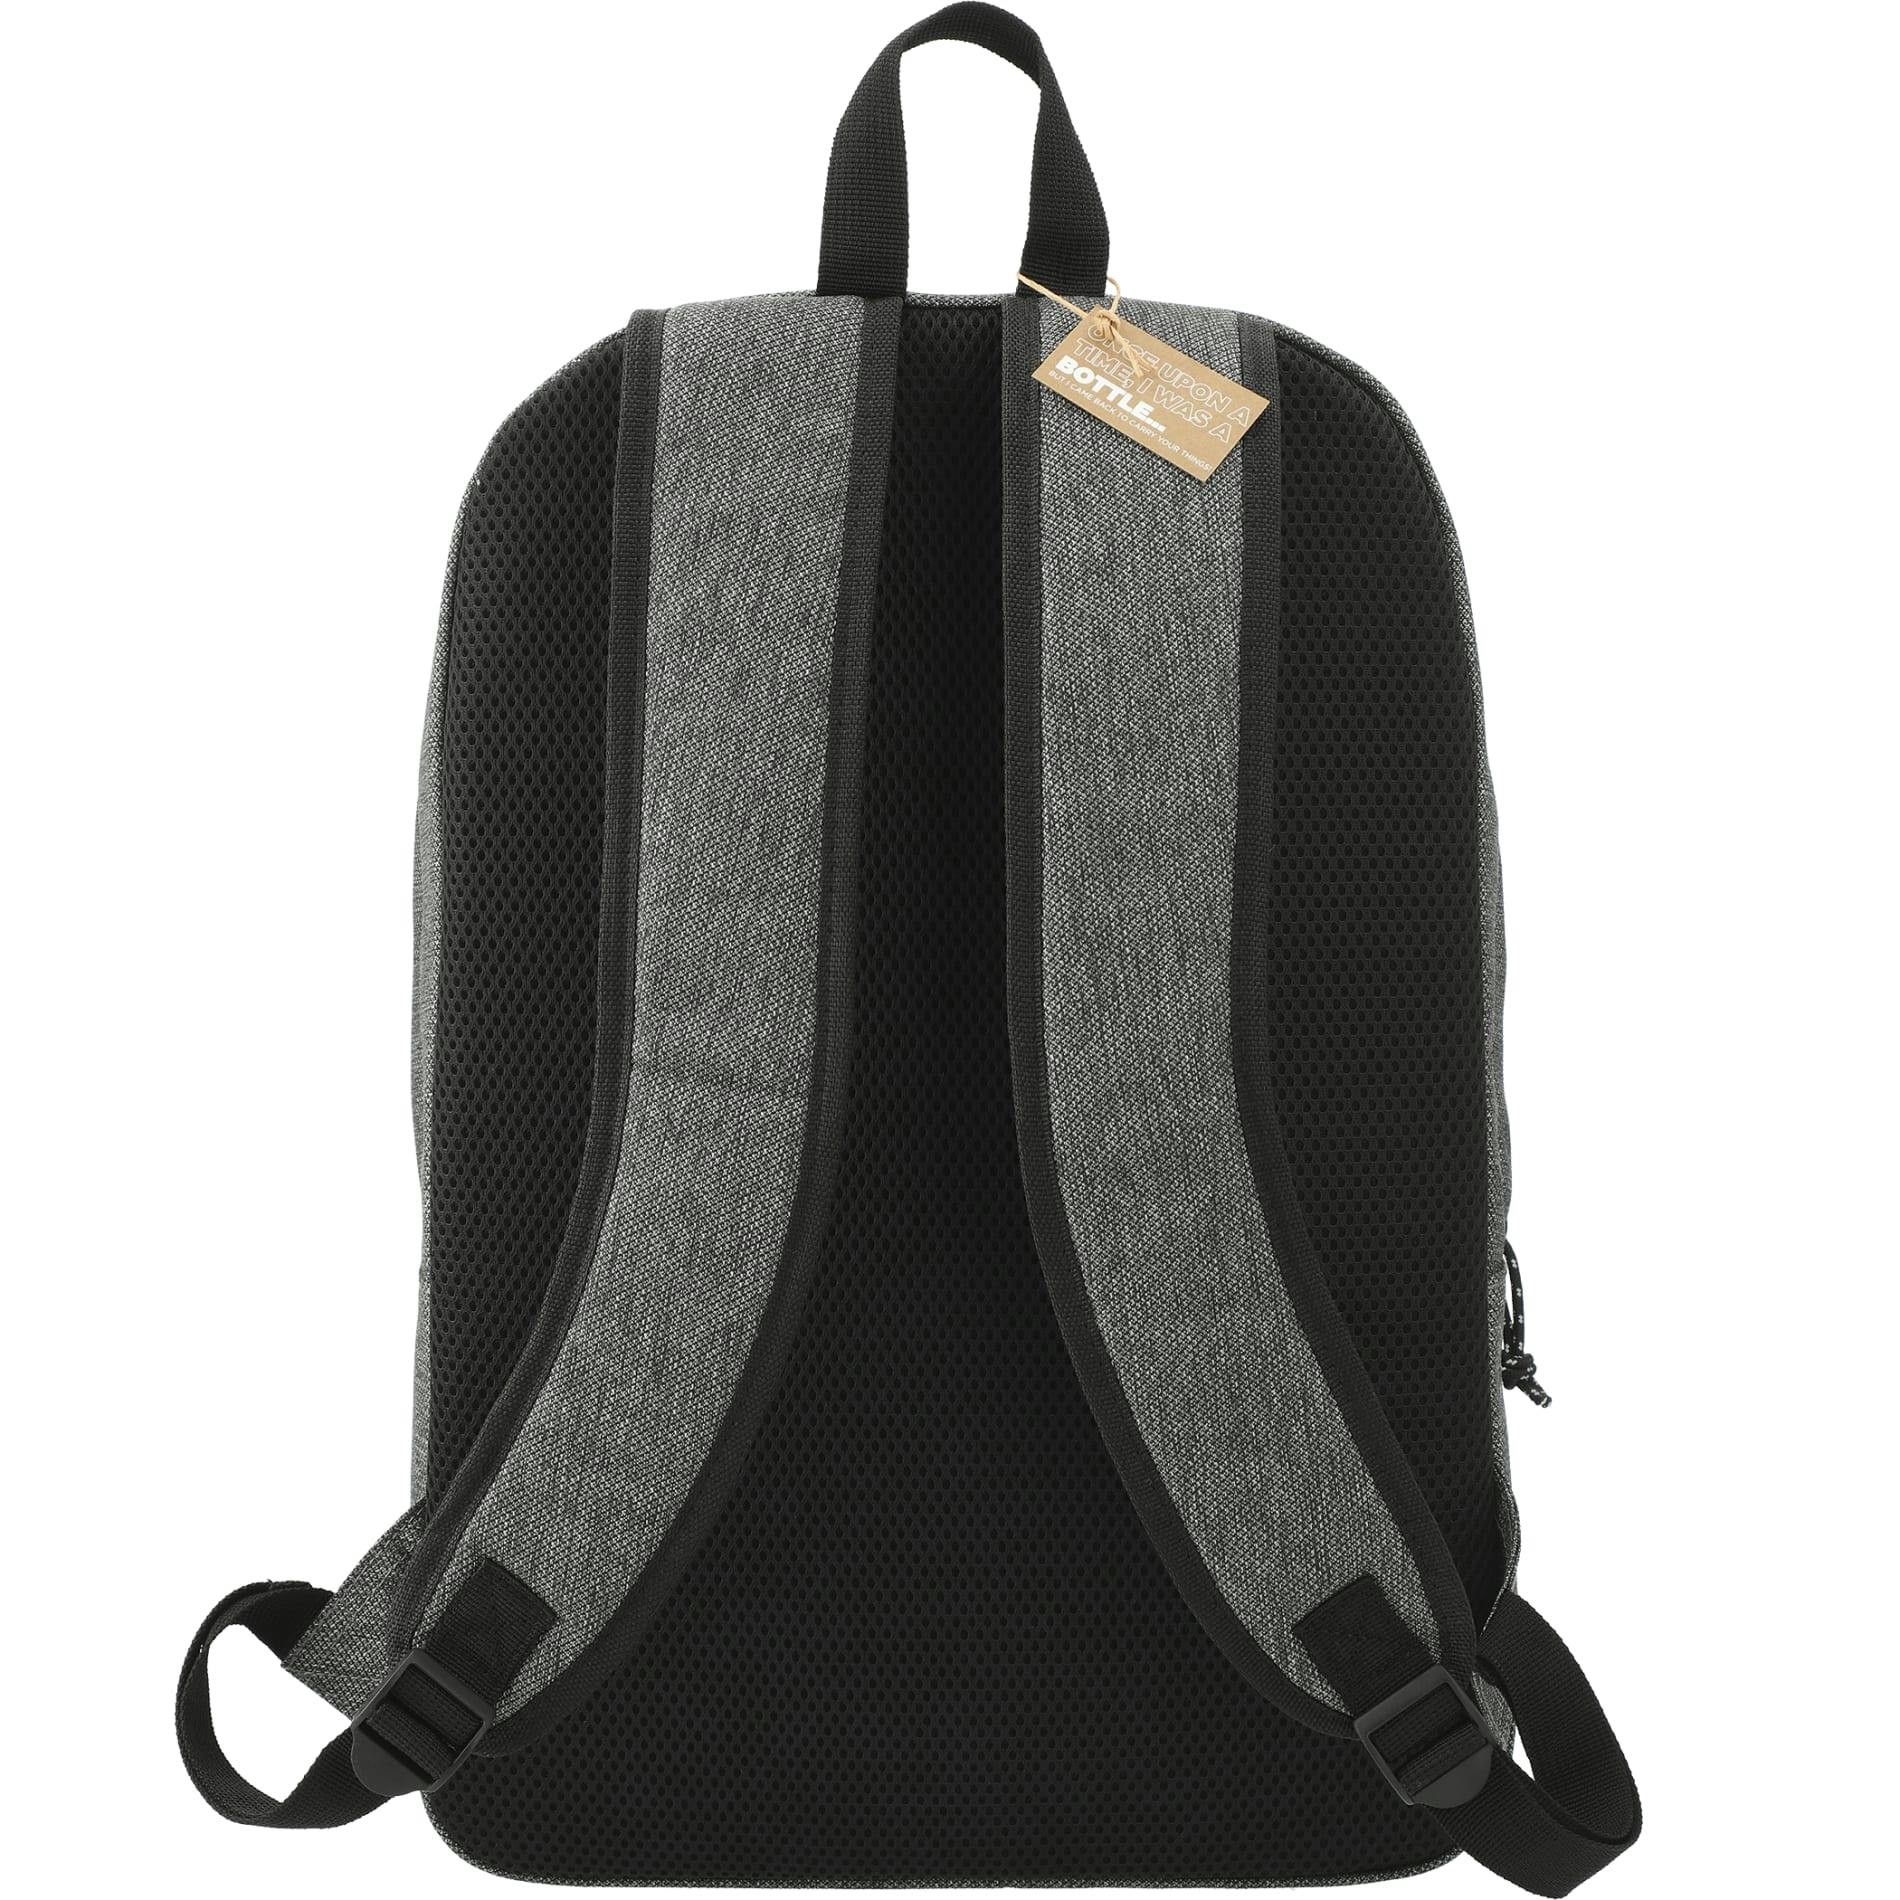 Vila Recycled 15" Computer Backpack - additional Image 3